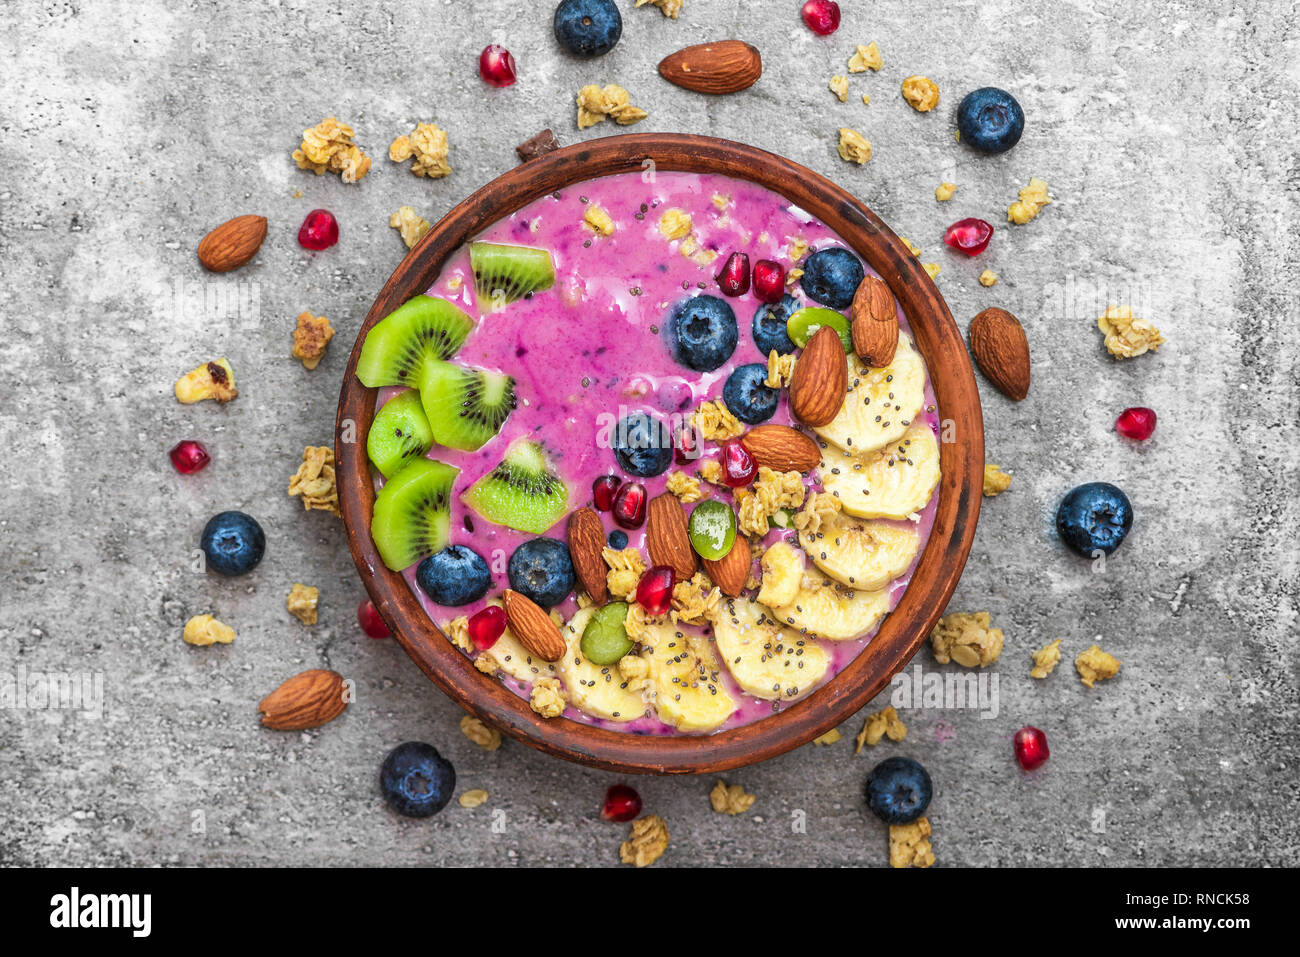 Smoothie bowl with fresh berries, fruits, nuts, seeds and homemade granola for healthy vegan vegetarian diet breakfast. top view Stock Photo